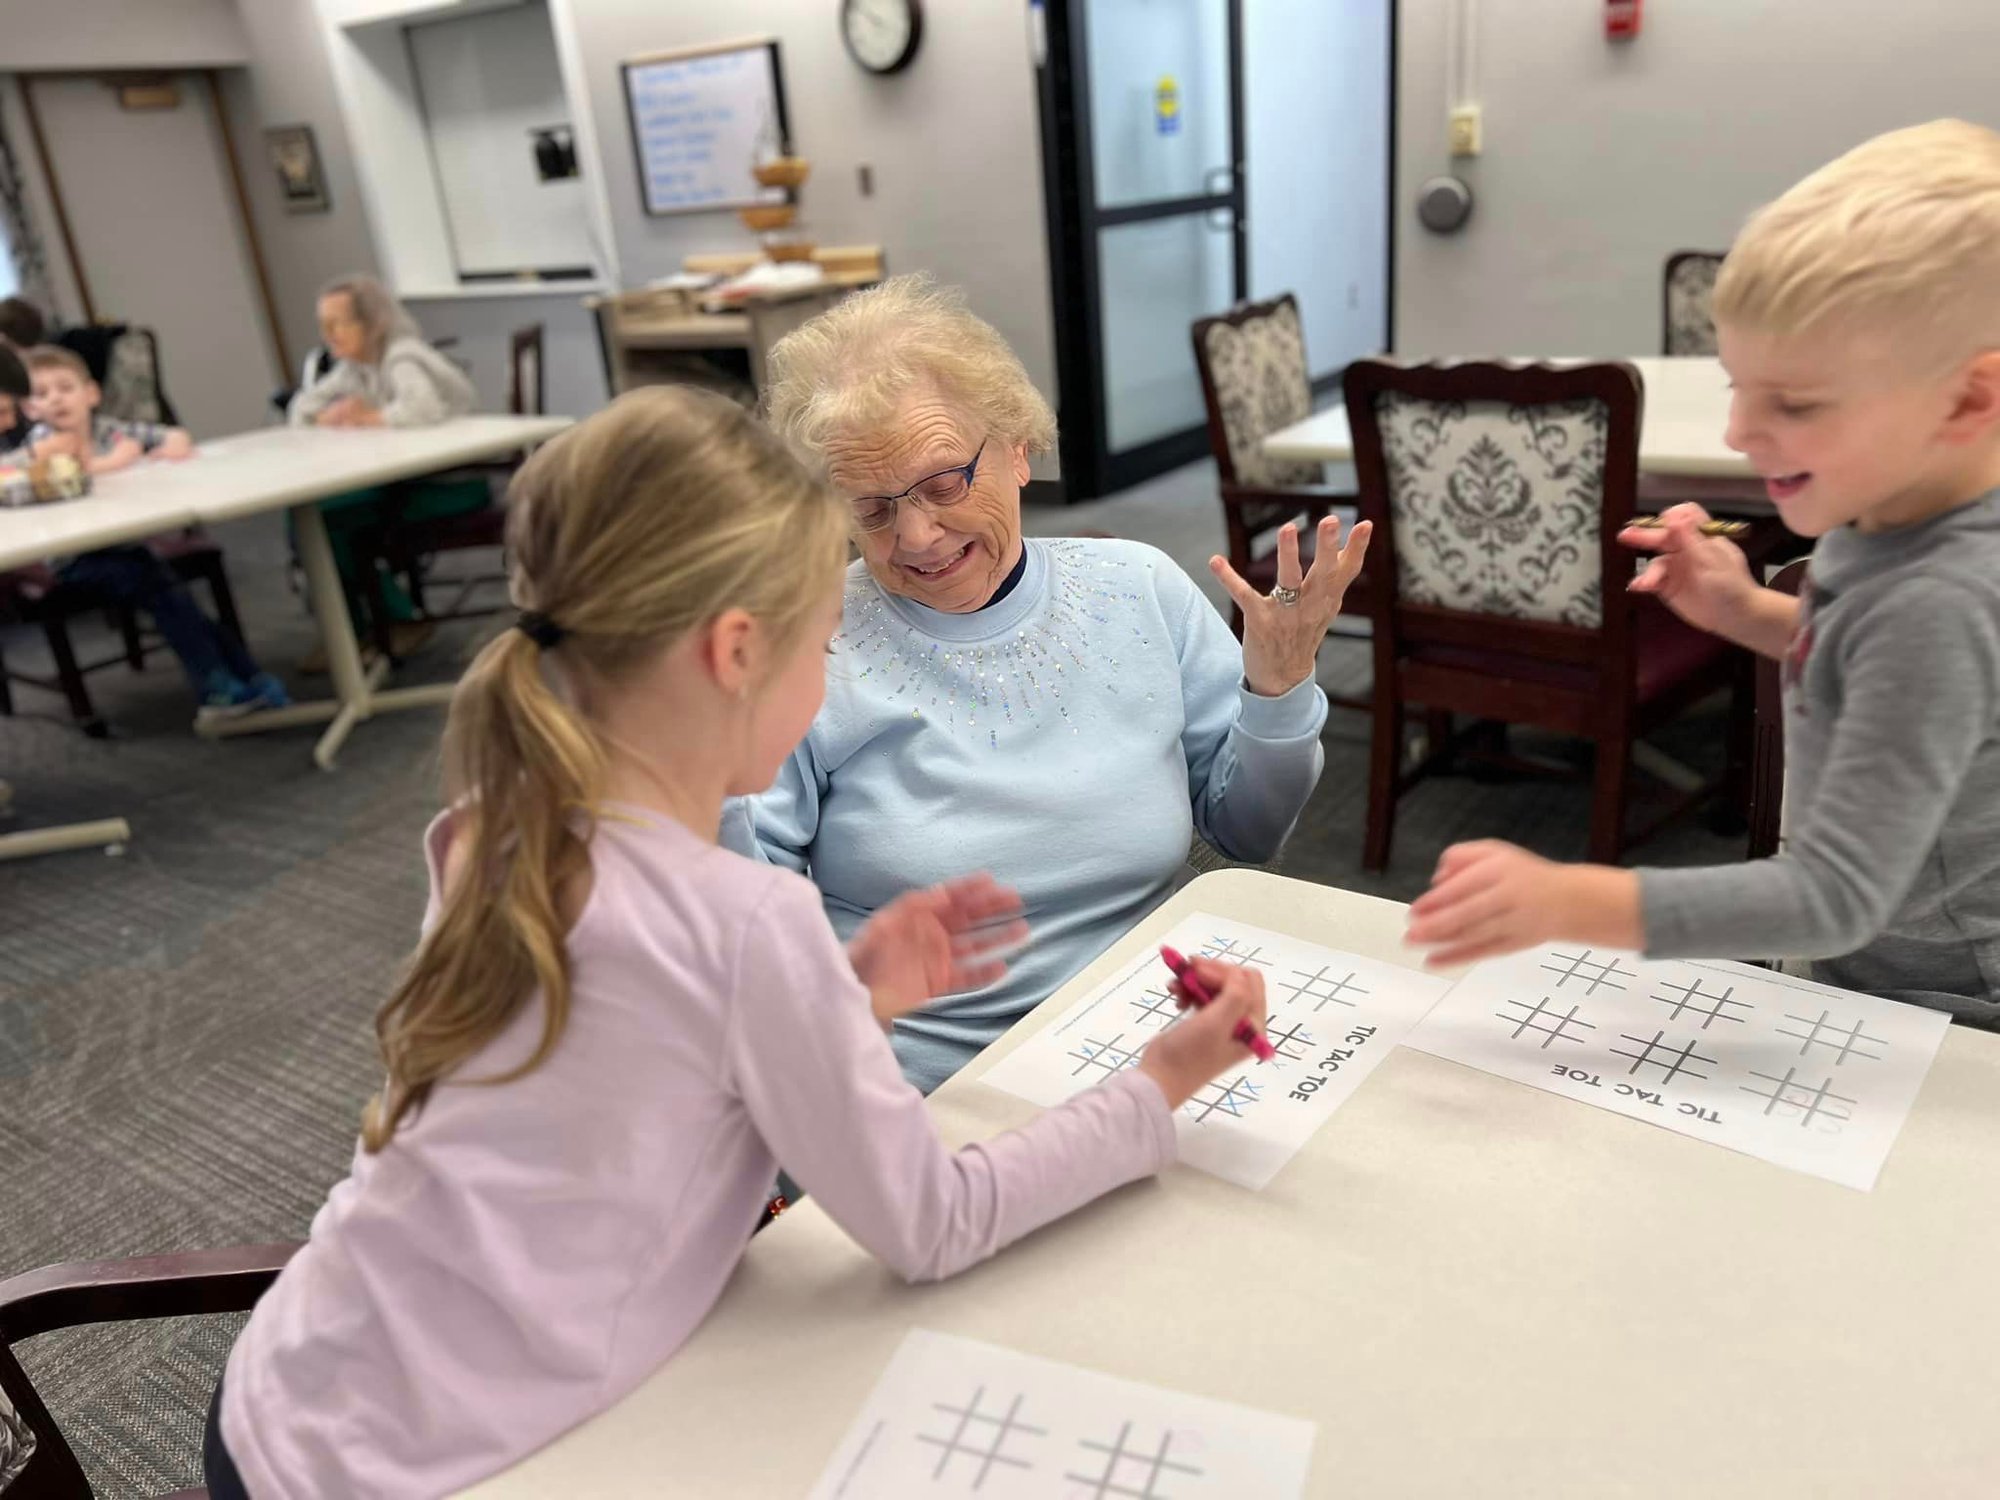 Grandmother playing tic-tac-toe with two of her young grand children